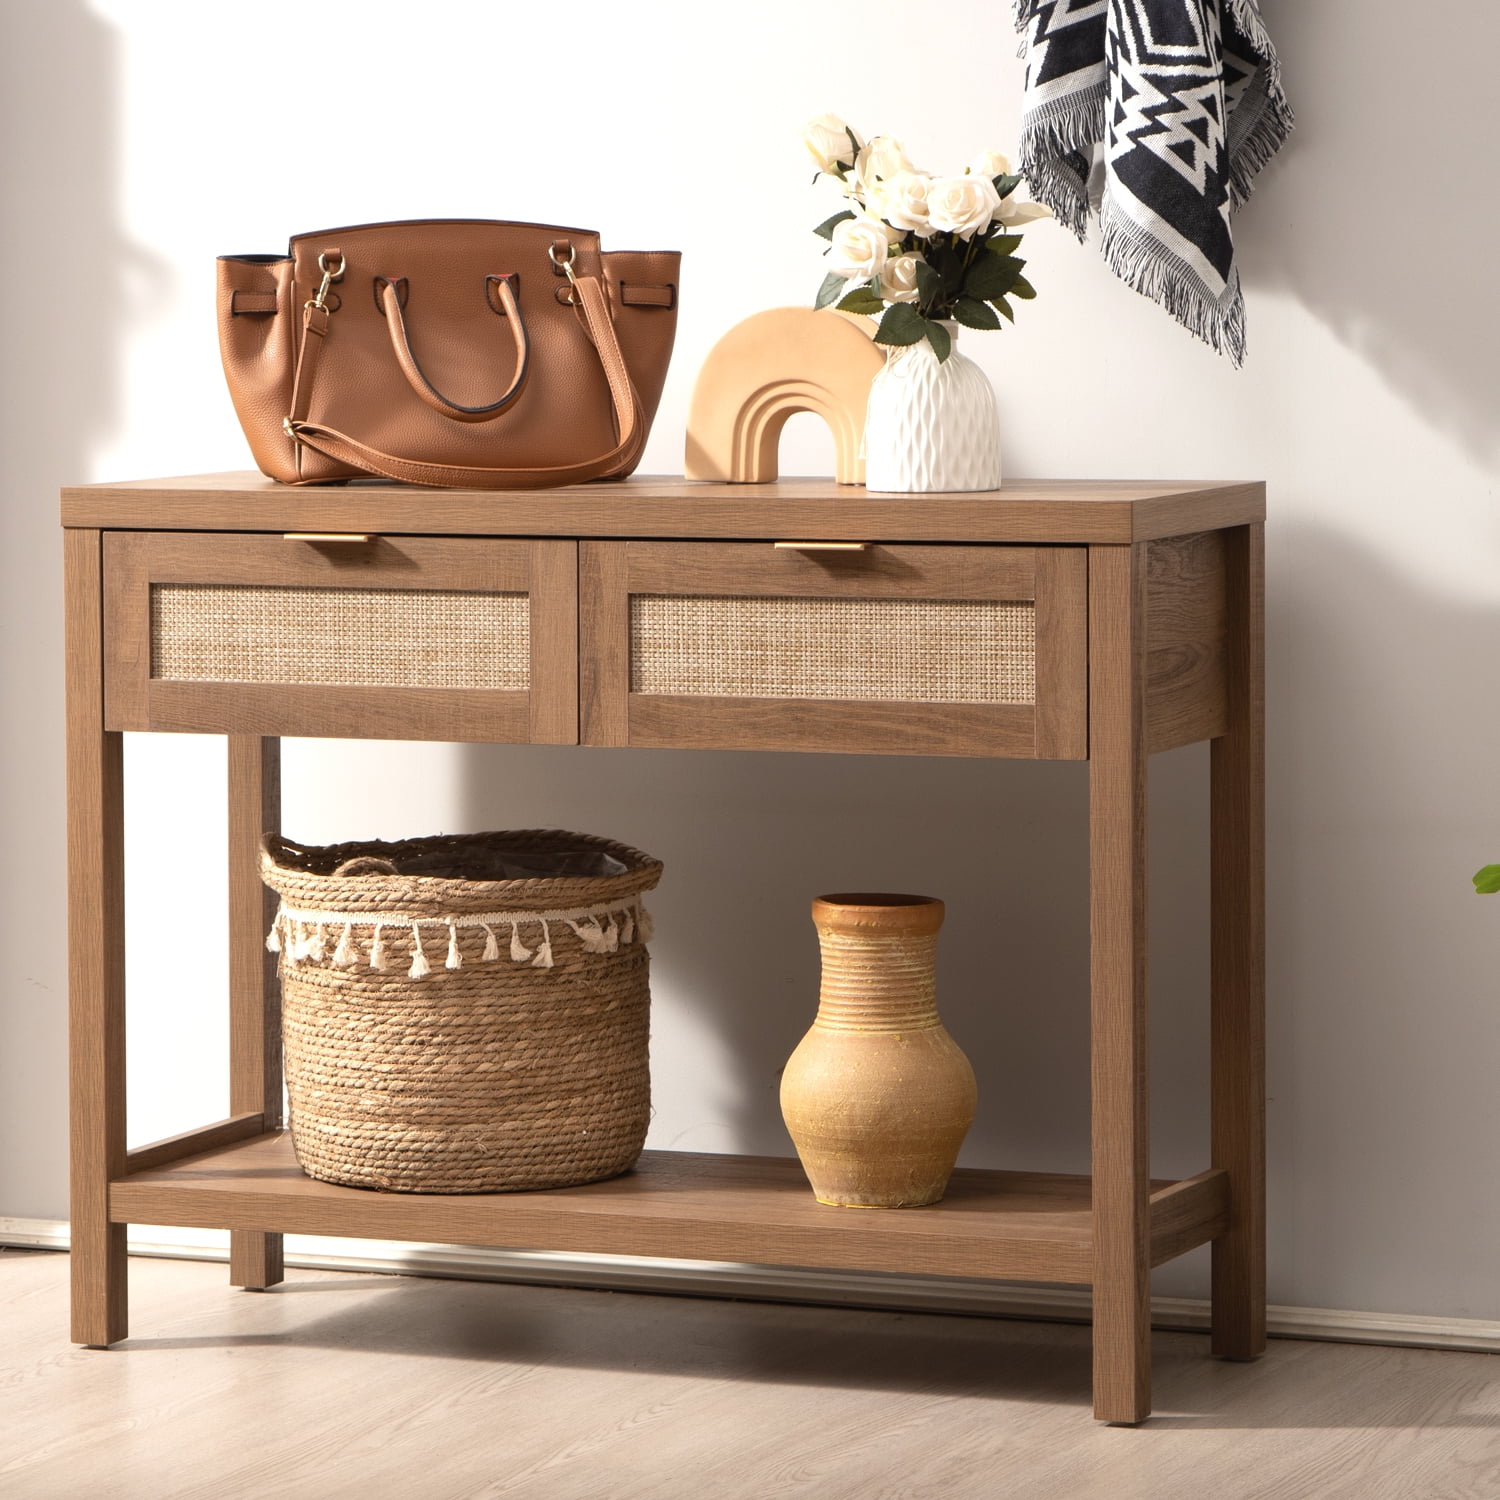 Surmoby Console Table With Rattan